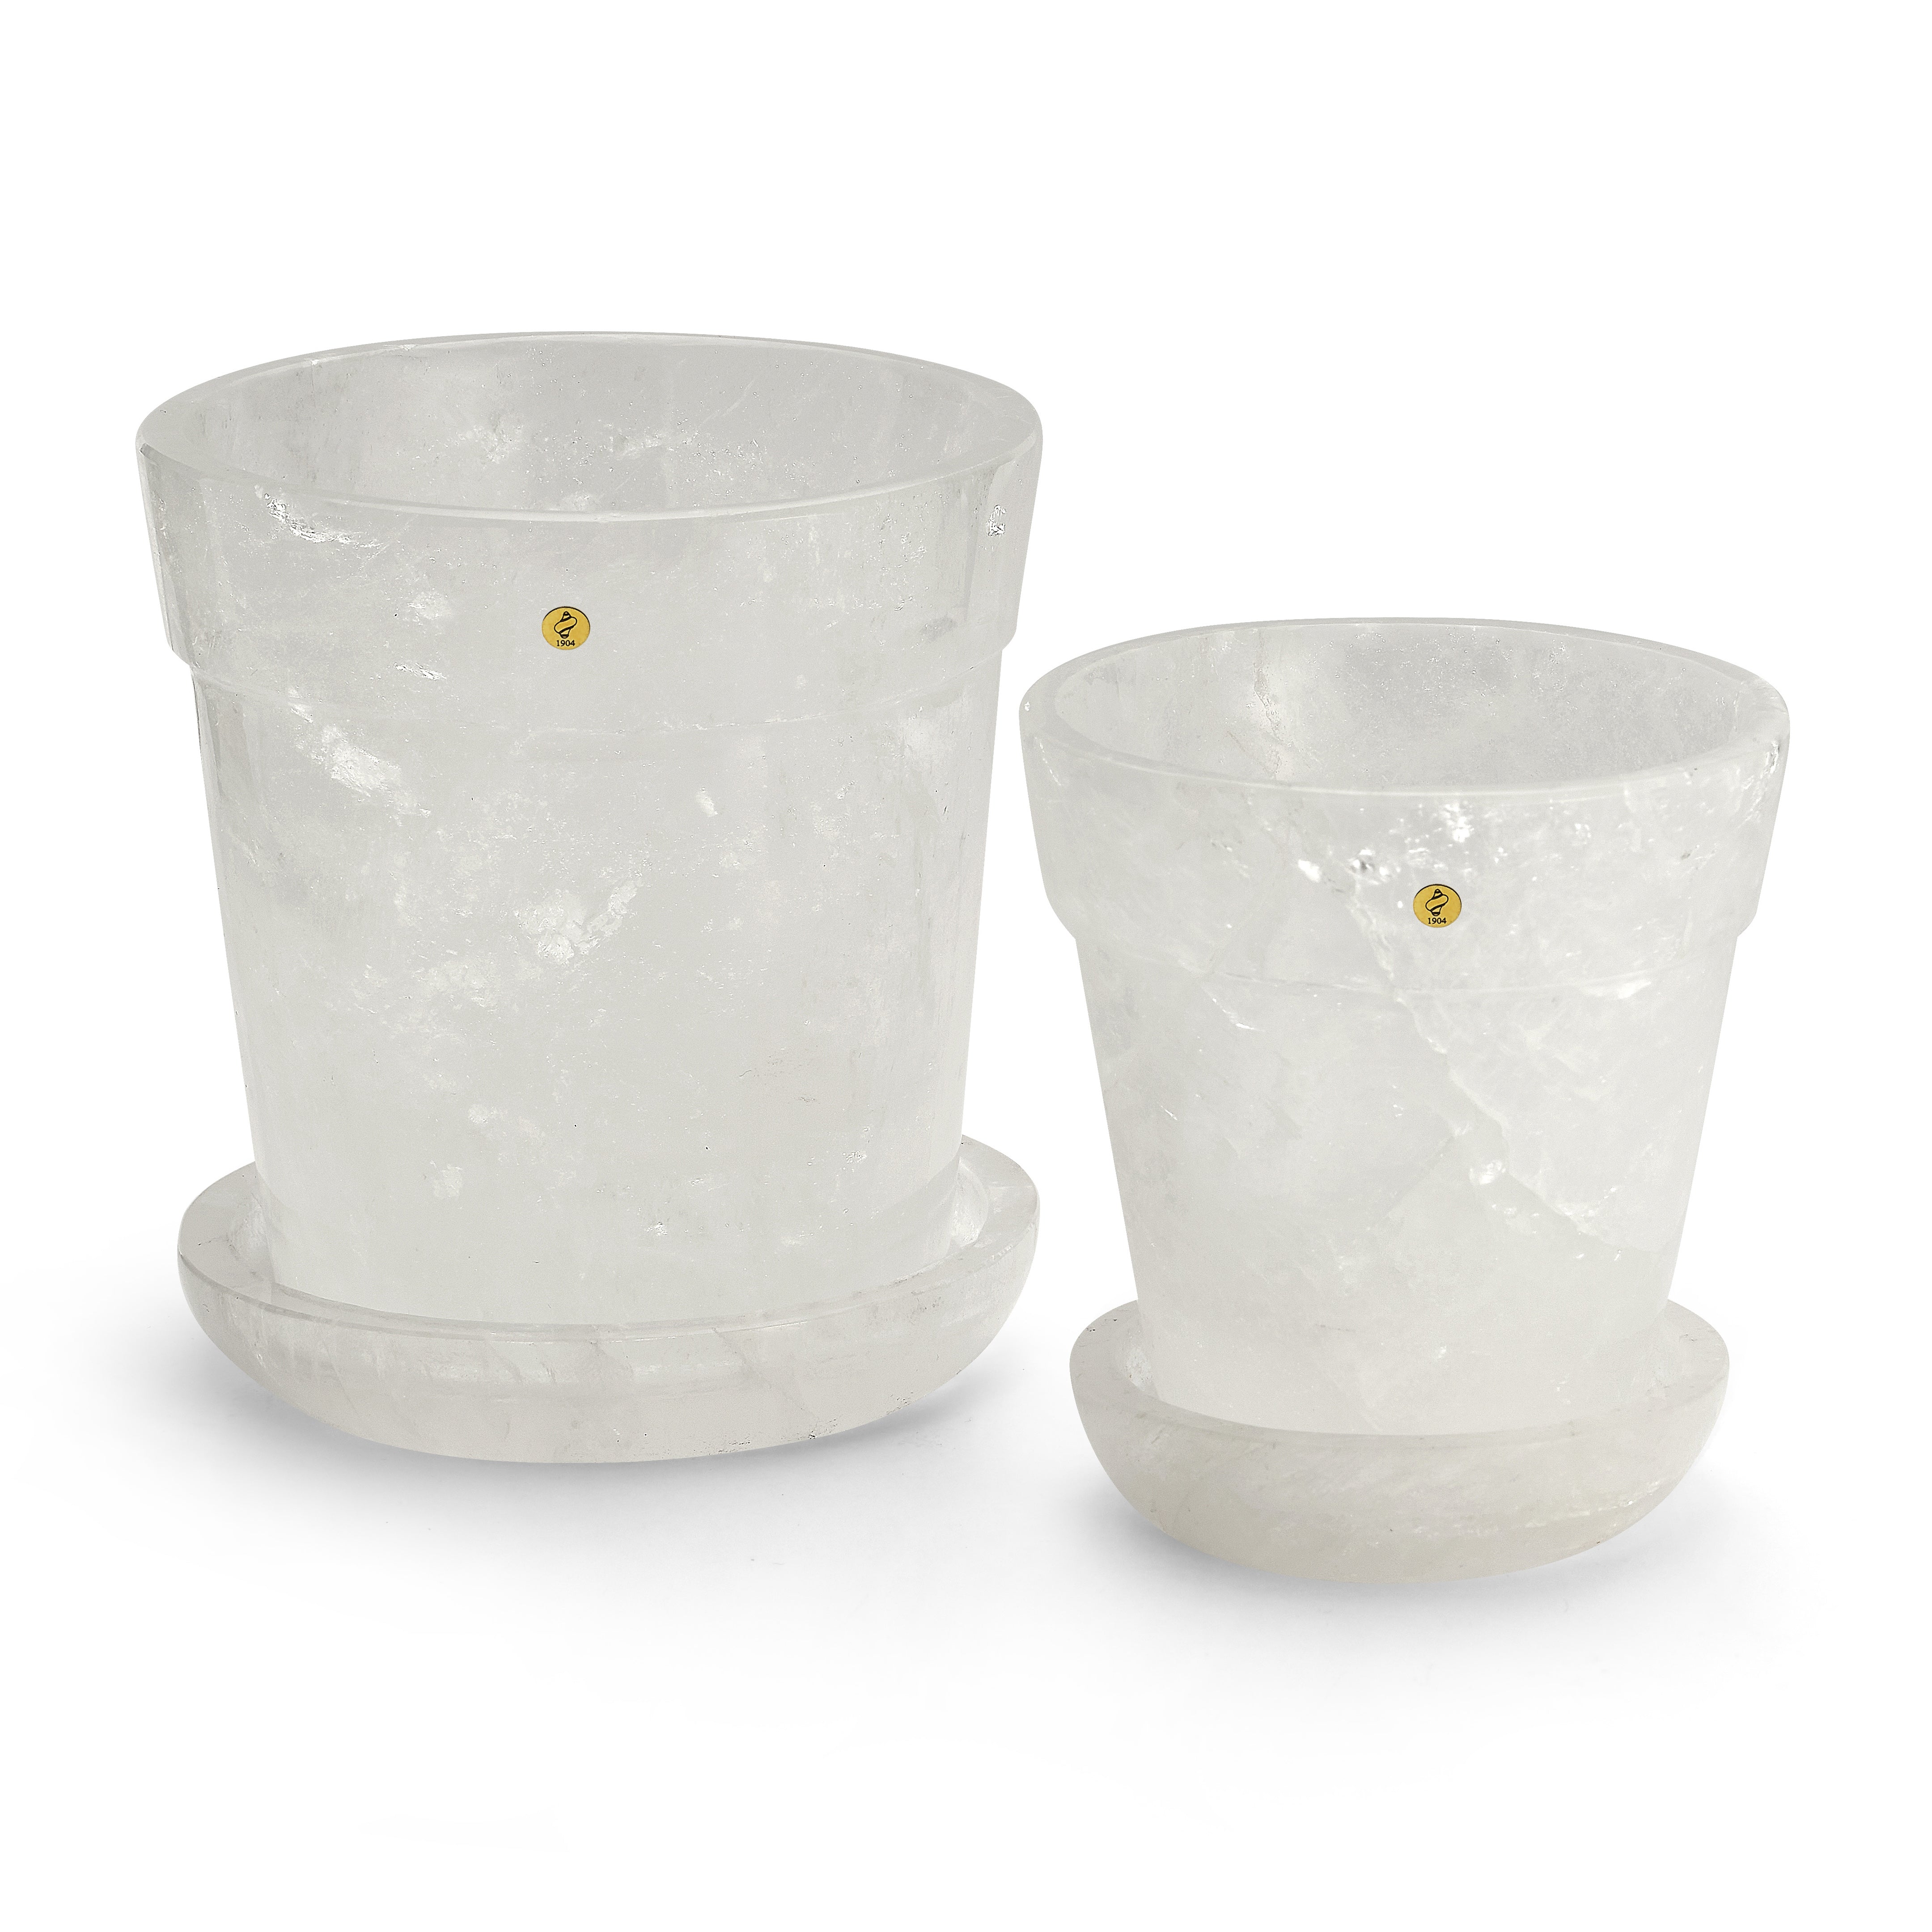 Large and Small Crystal Pots